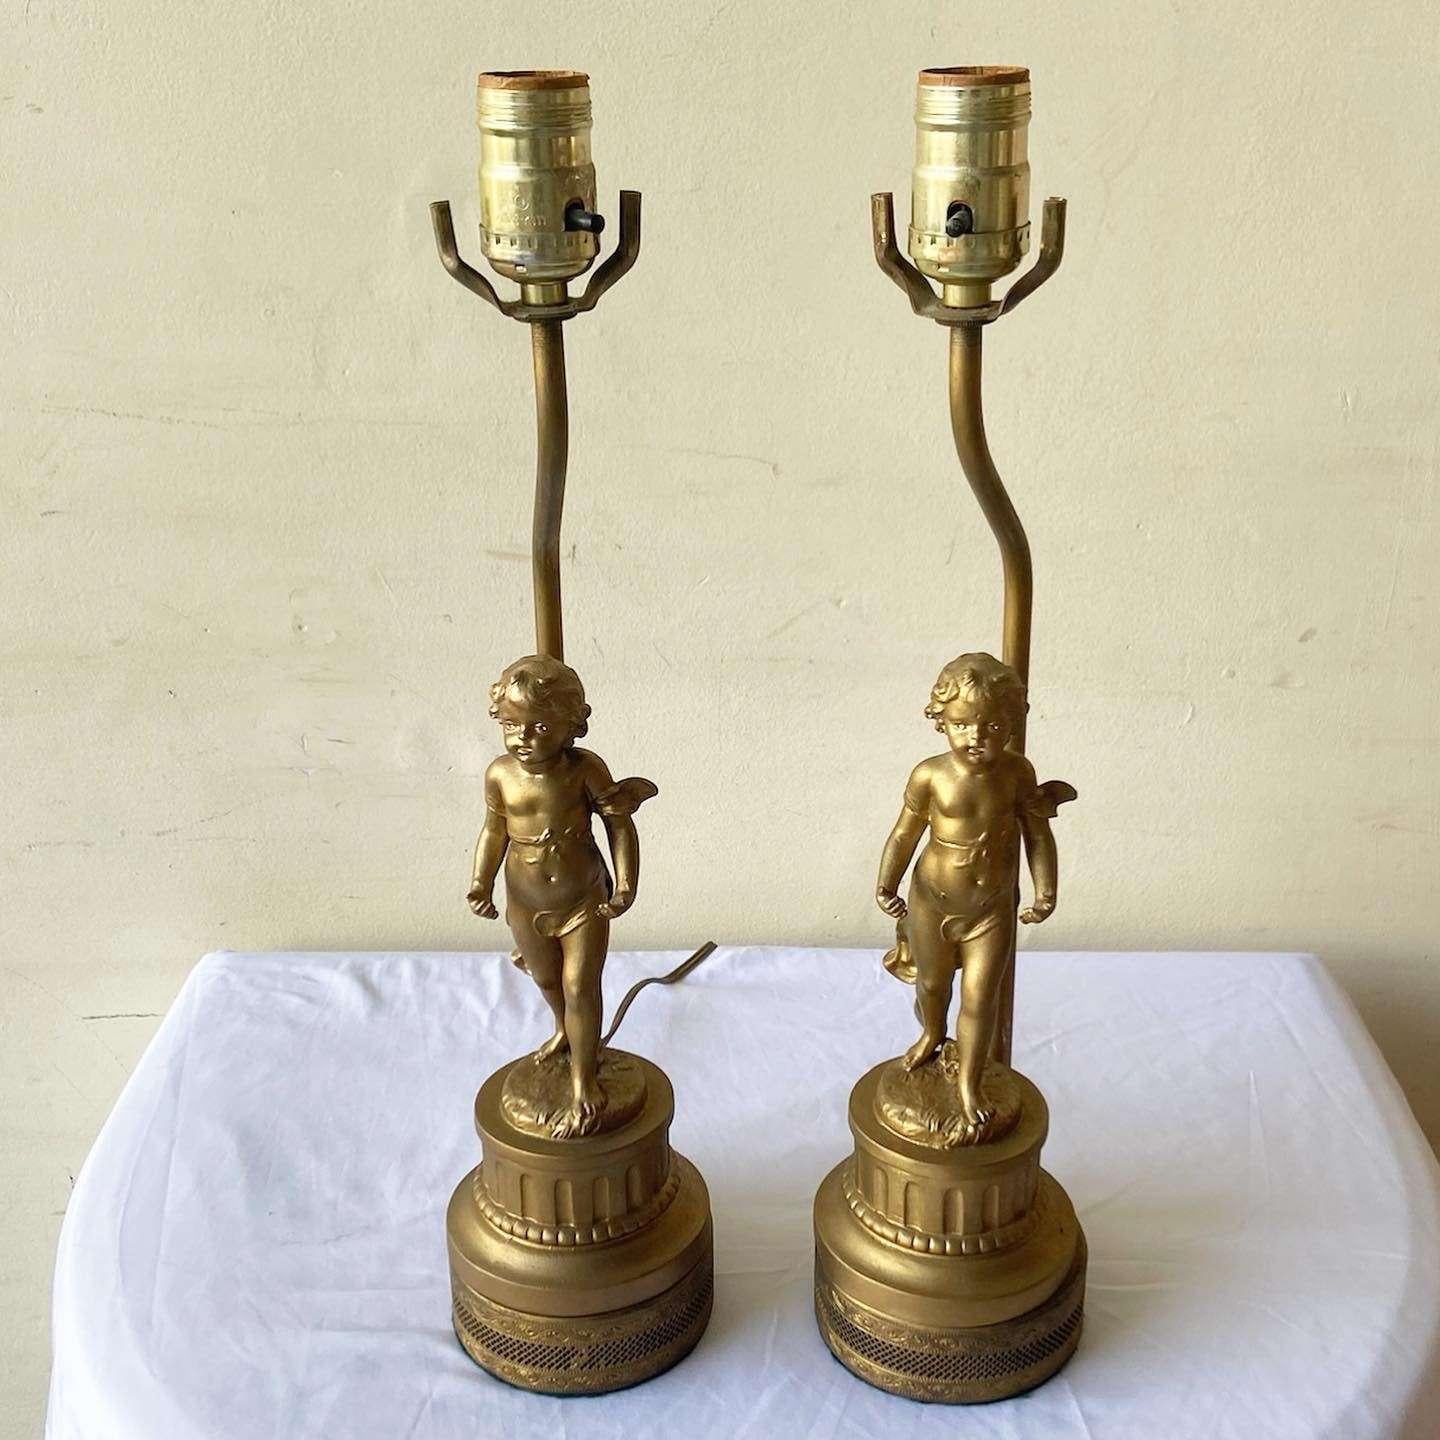 Mid-20th Century French Gilt Cherub Figural Torch Table Lamps - a Pair For Sale